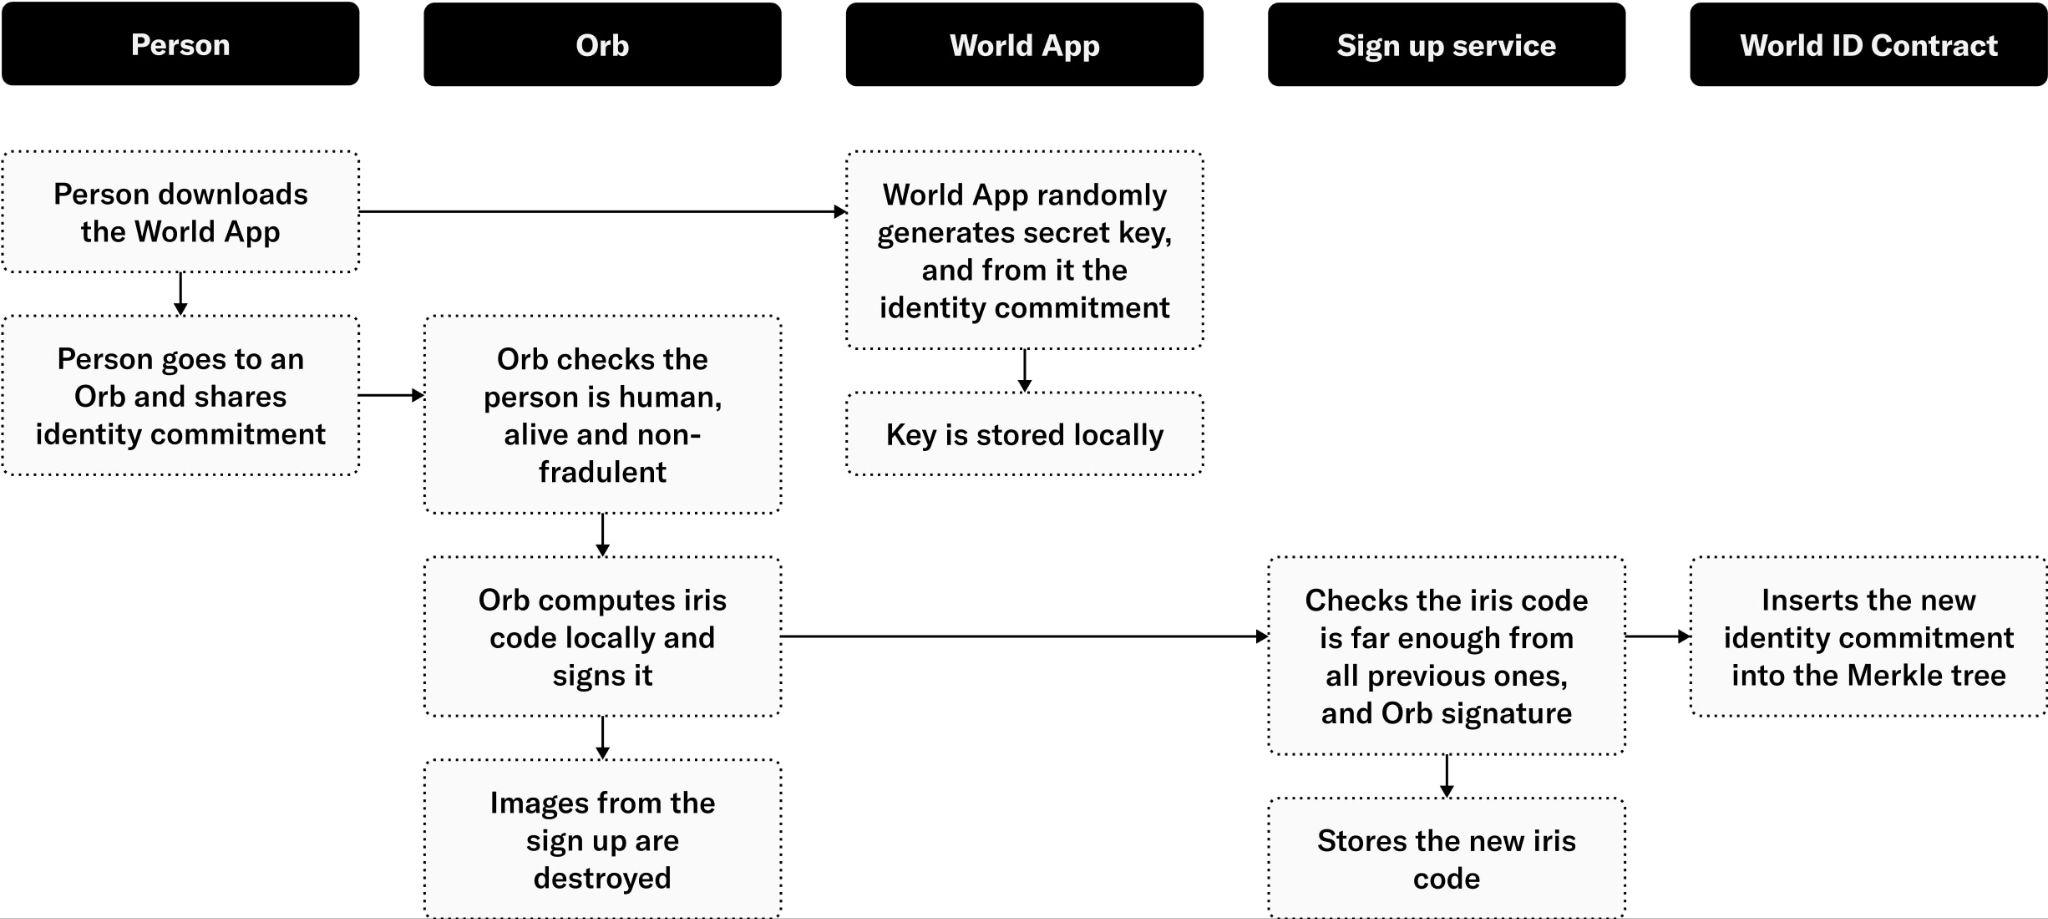 Figure 31: Enrollment process for Orb signal using World App as the identity wallet